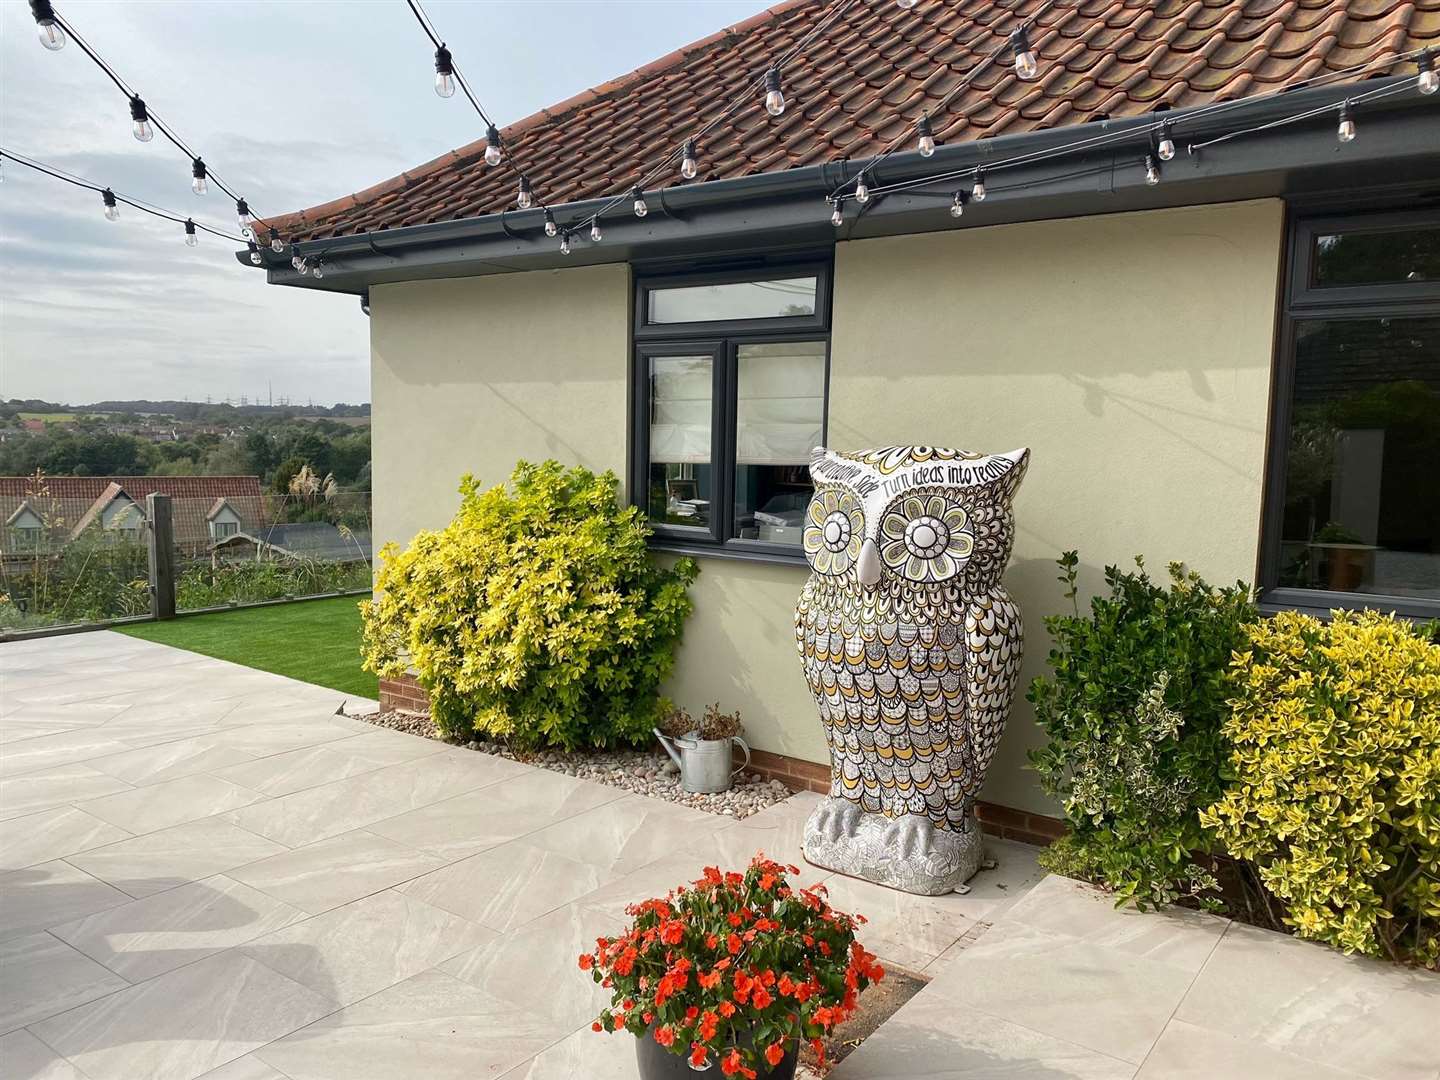 Zentag-Owl at its new home. Picture: St Elizabeth Hospice